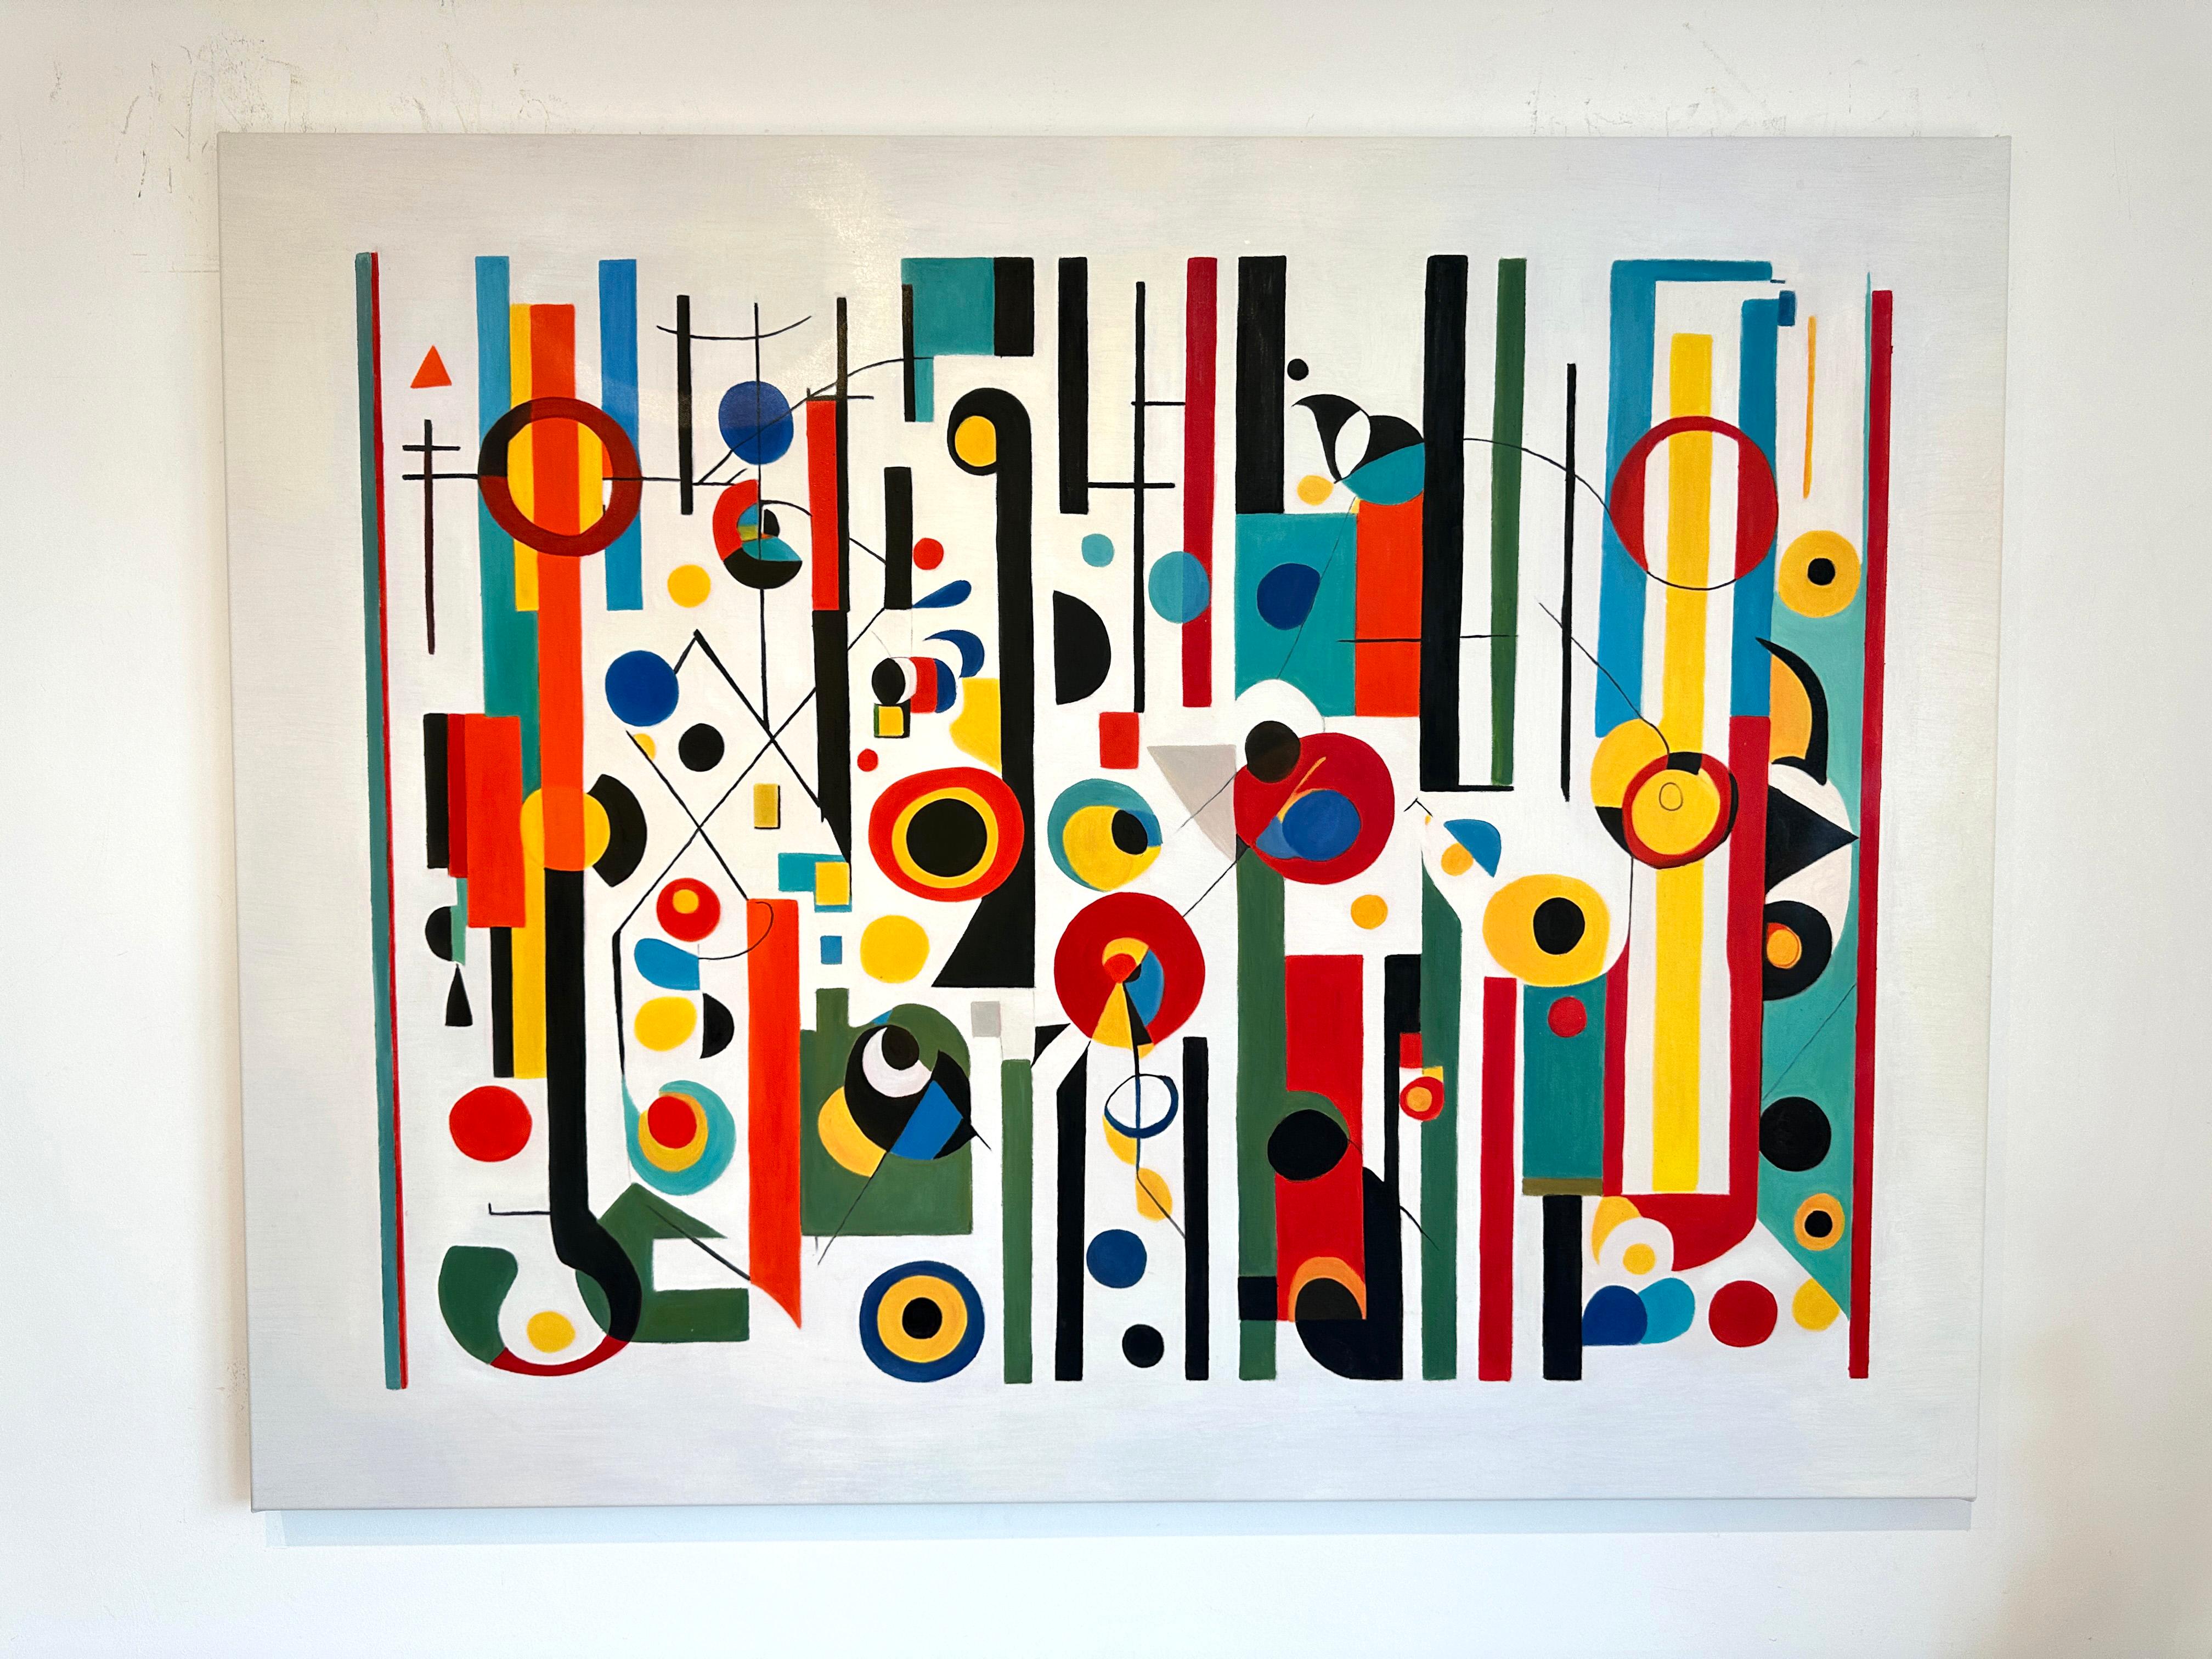 Lilly Muth's geometric abstractions are colourful works full figures that of space such as the distance, shape, size, and relative position of figures. Her use of colour is bold yet contemporary and her works are defined by clear lines and the